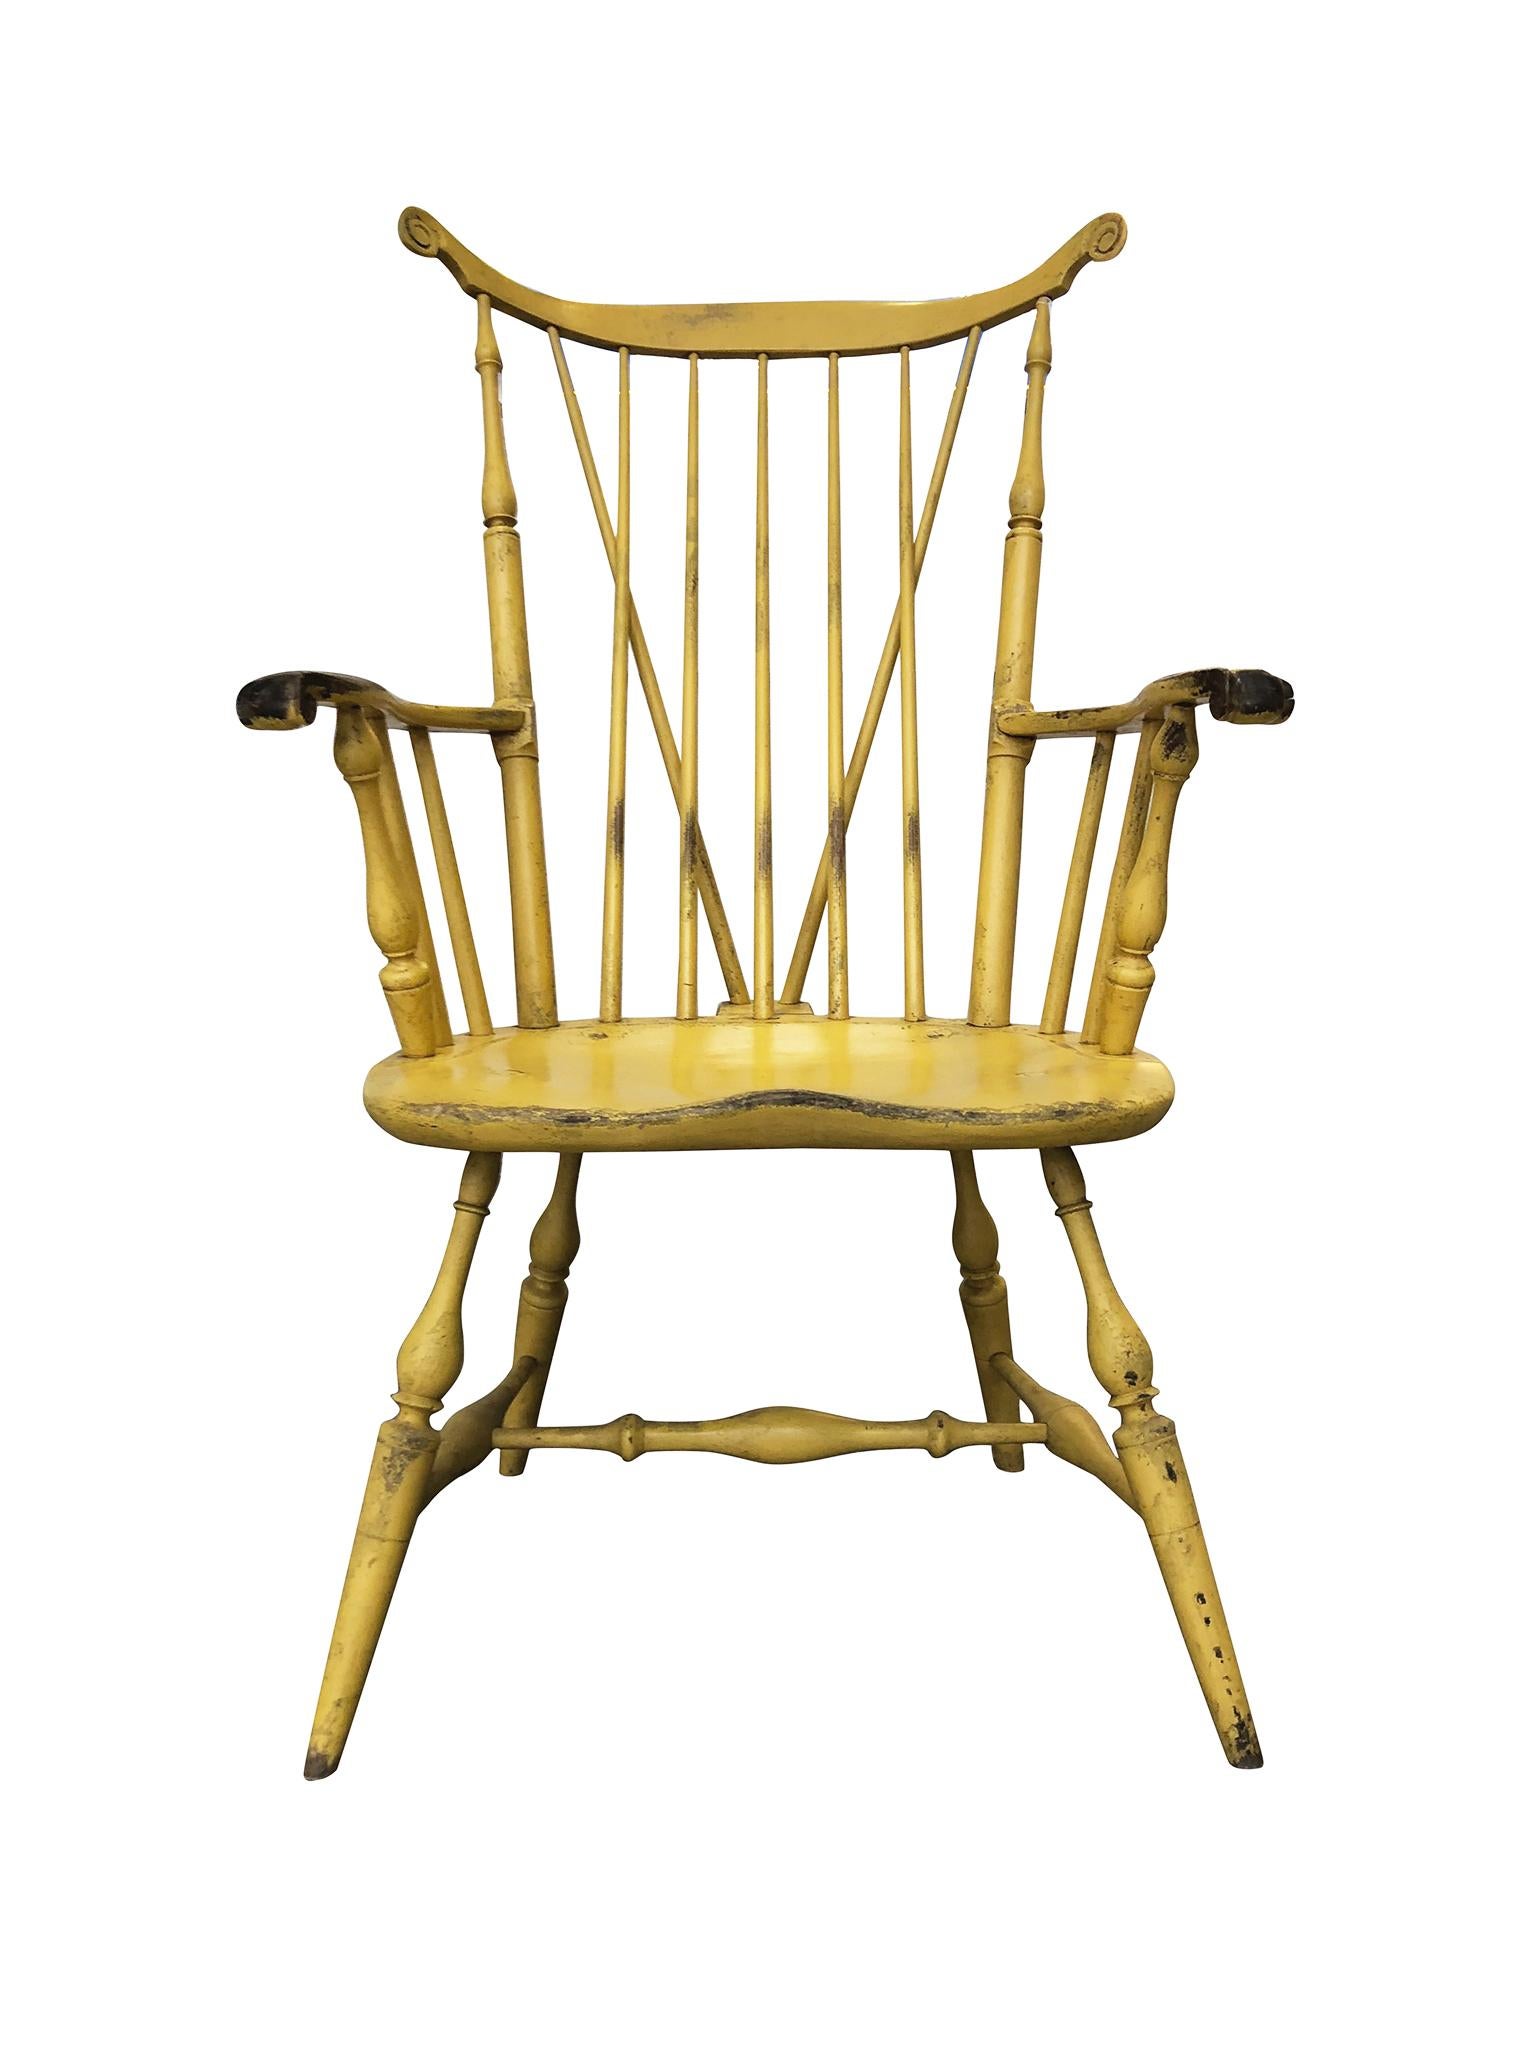 A Windsor chair handcrafted by Bill Wallick. Made from poplar wood and hand painted in a yellow coat that has been enriched with texture and wear over the years. The chair is faithful to a Classic Windsor design: a spindle fanback, a wing-tipped